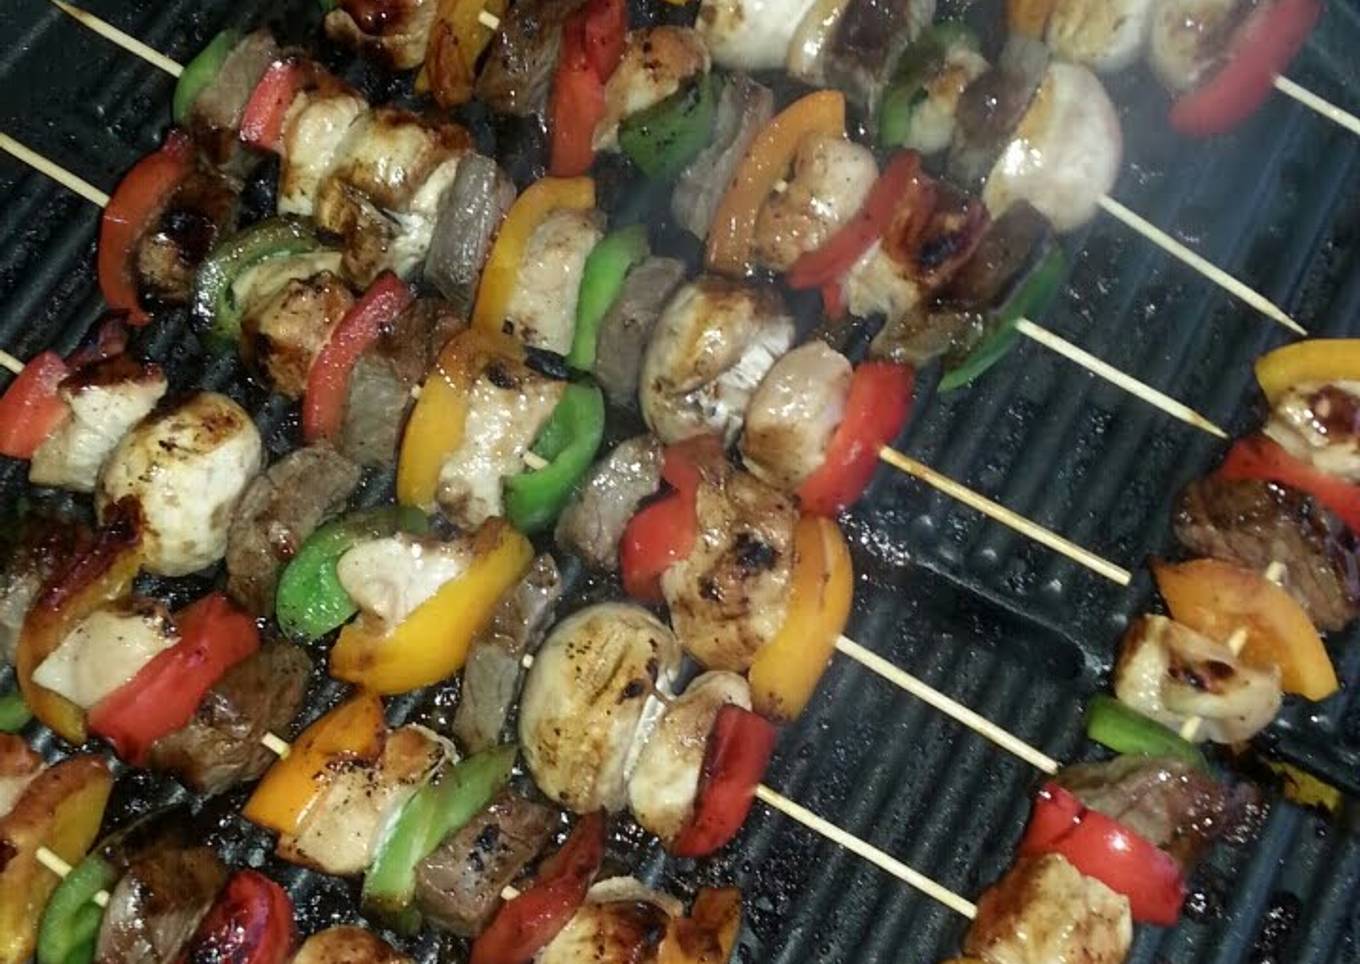 Marinated Chicken and Beef Kabobs